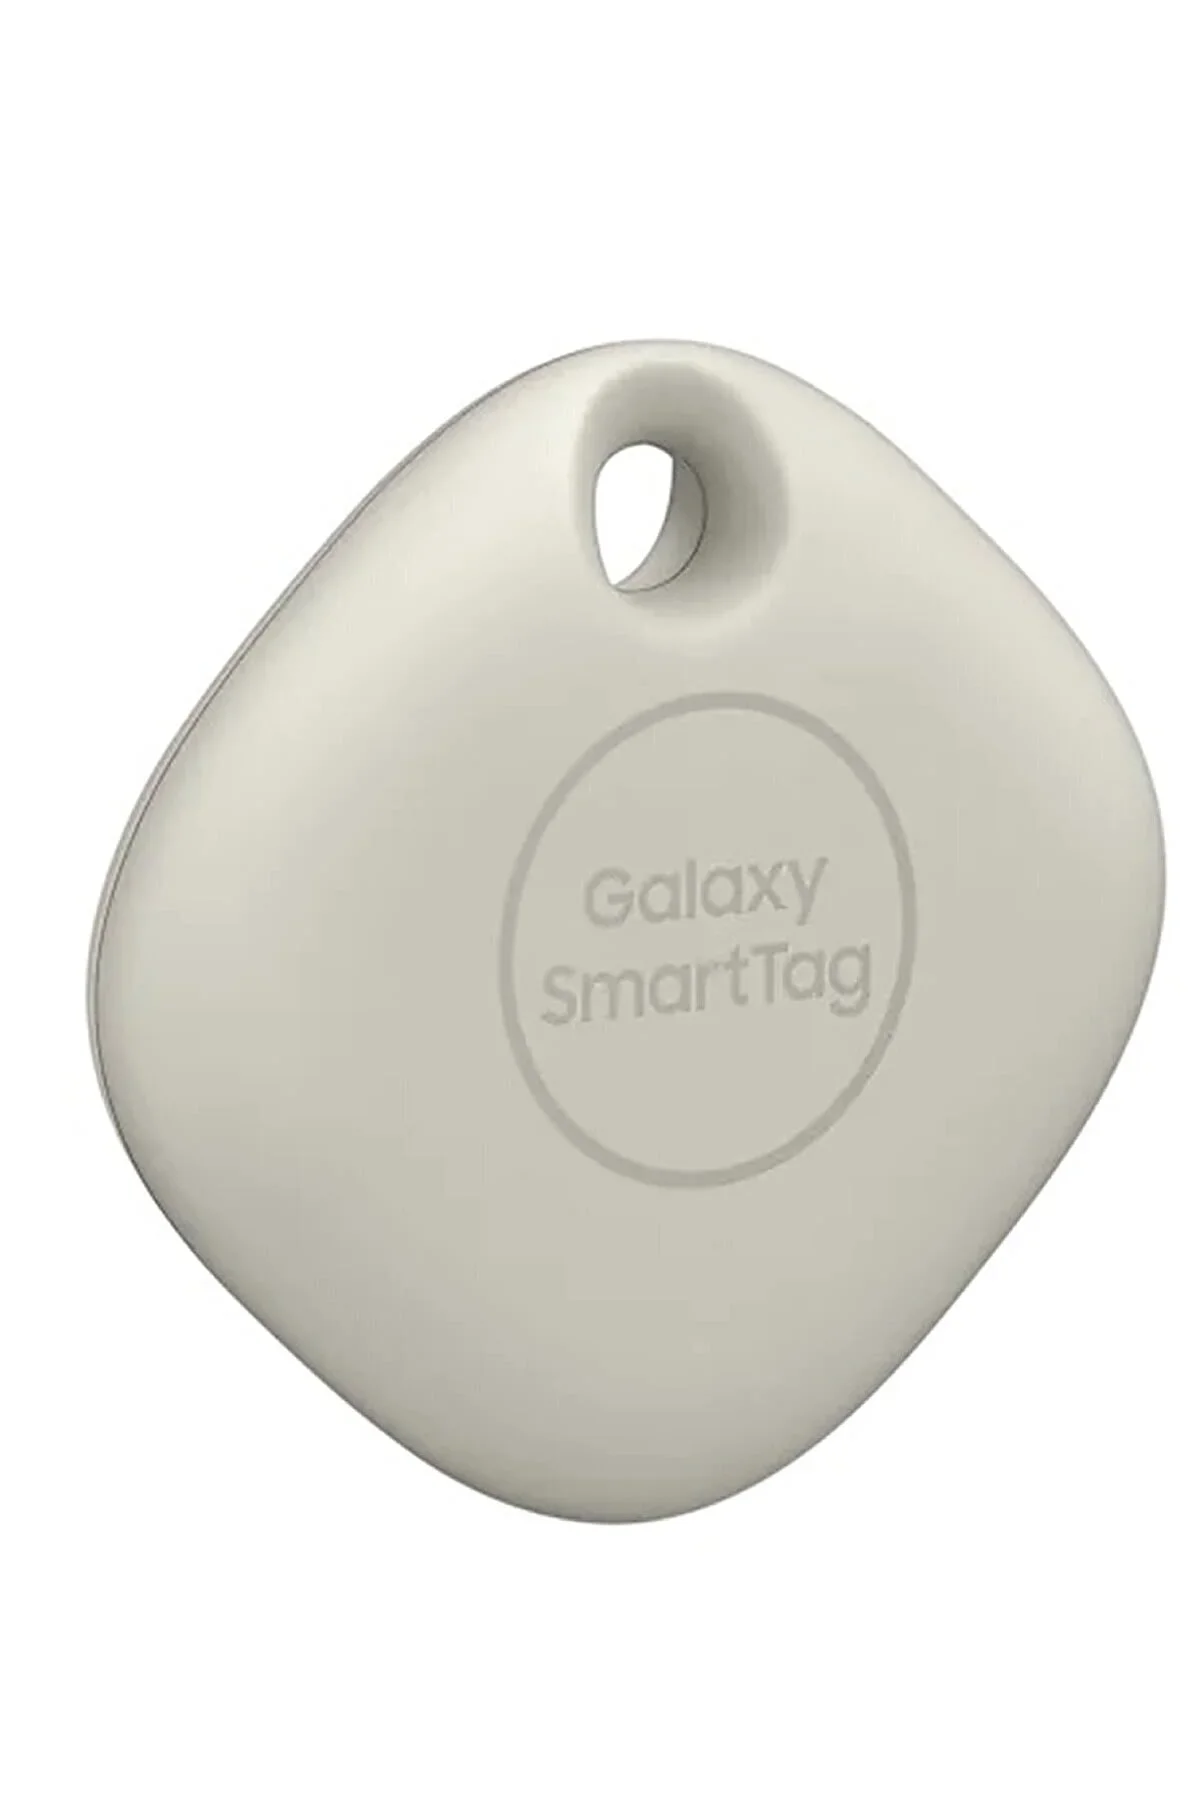 

Glaxy Smart Tag for Samsung Gps Tracker EI-T5300 Don't Lose Your Favorite Items Beige Color